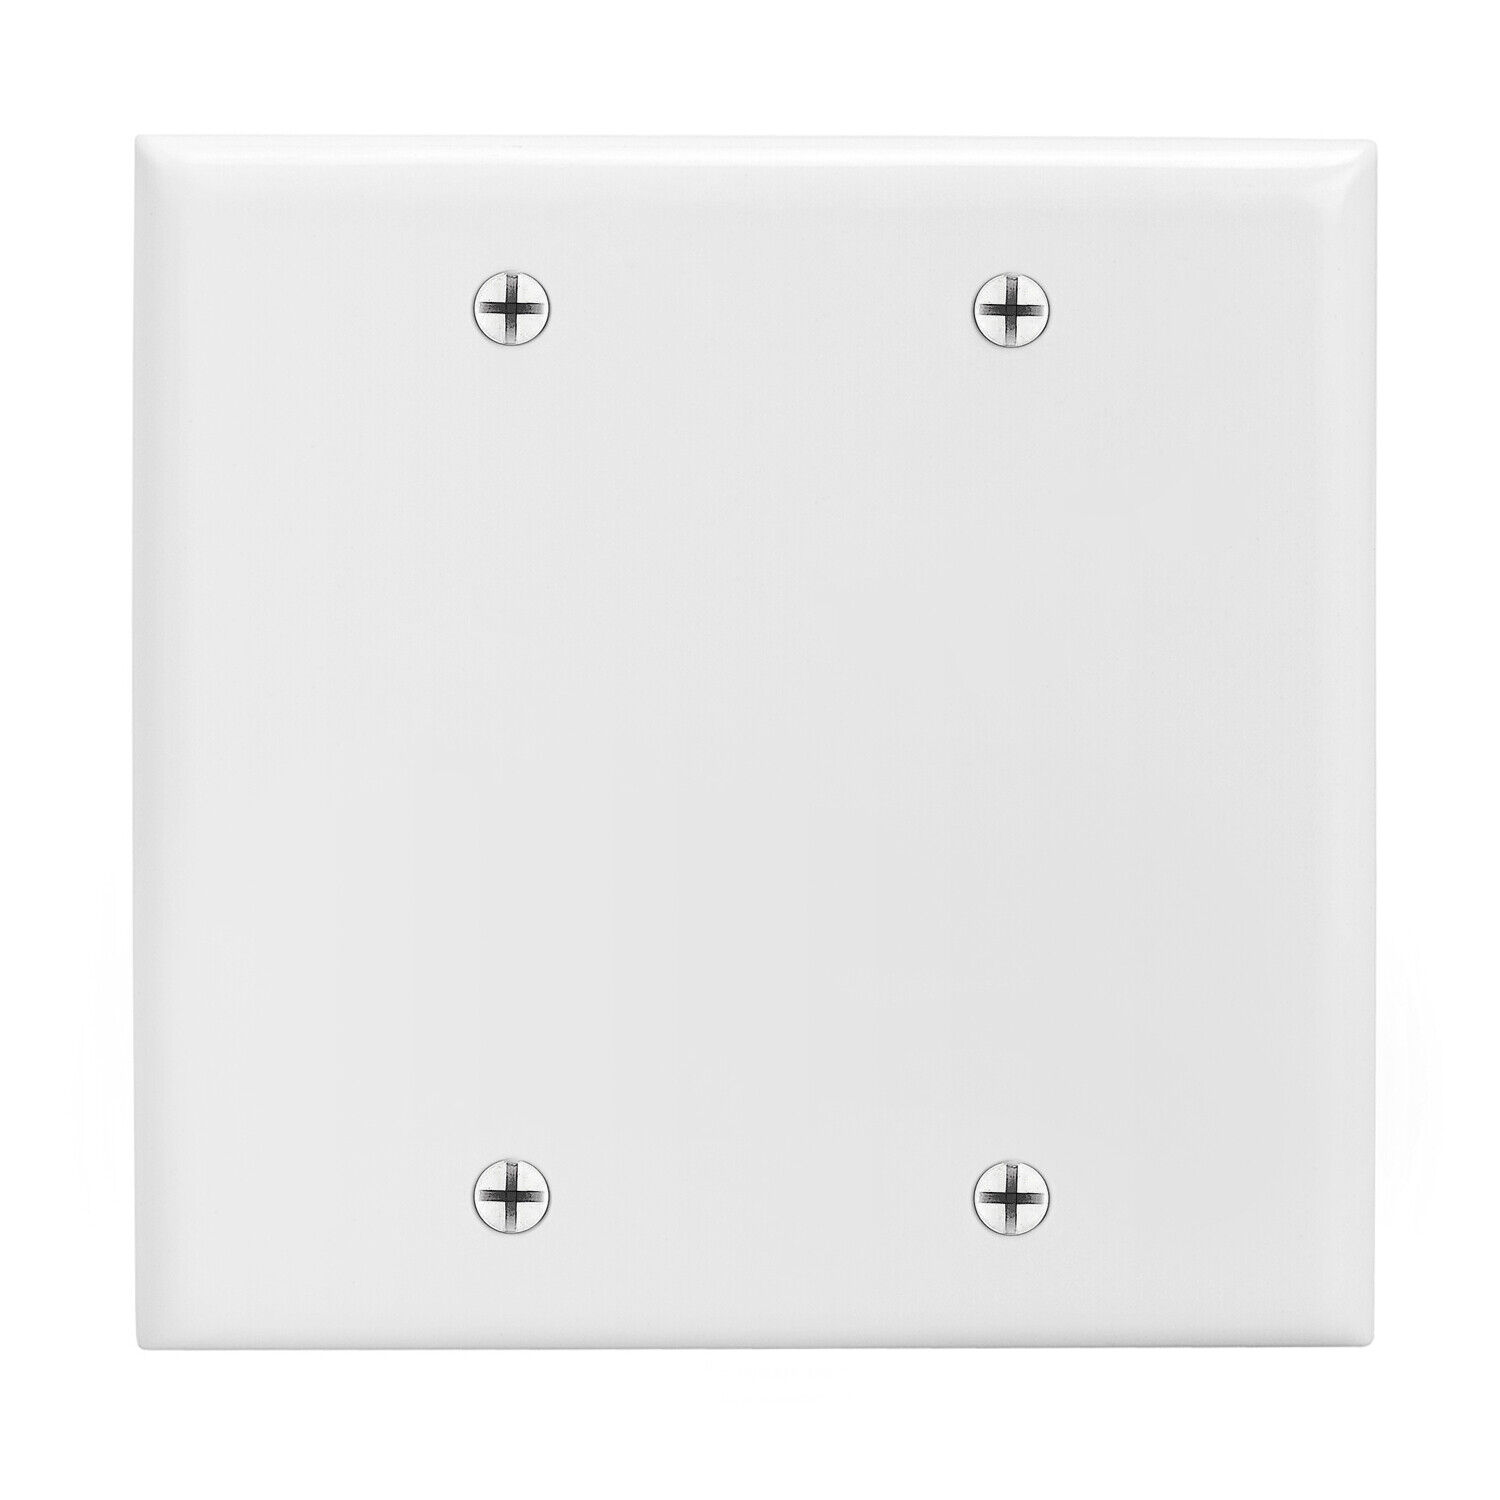 Blank Wall Plate Outlet Cover Dual 2 Gang White Decora Faceplate Wallplate